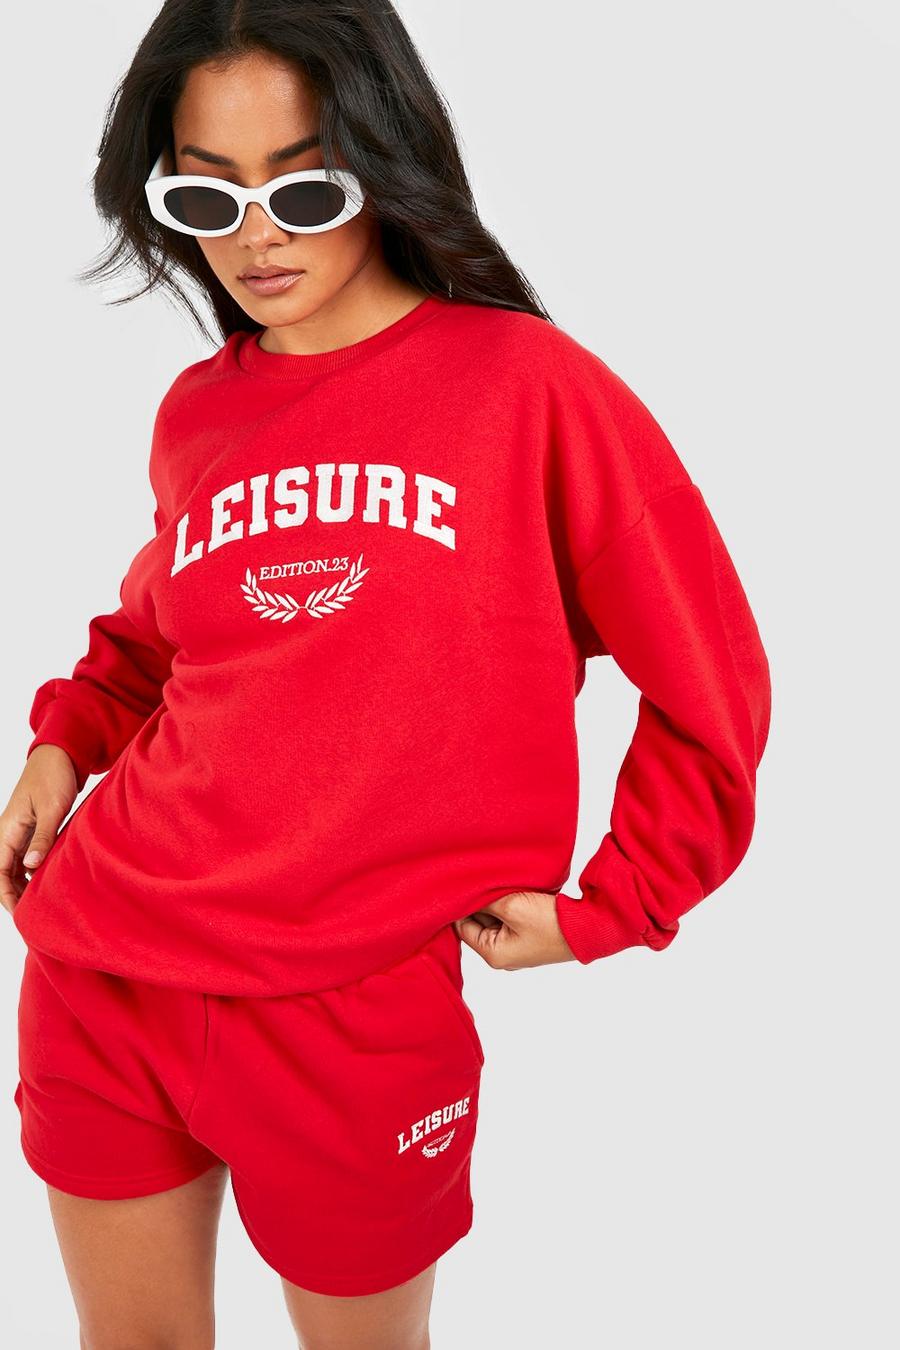 Red Leisure Embroidered Sweatshirt Short Tracksuit